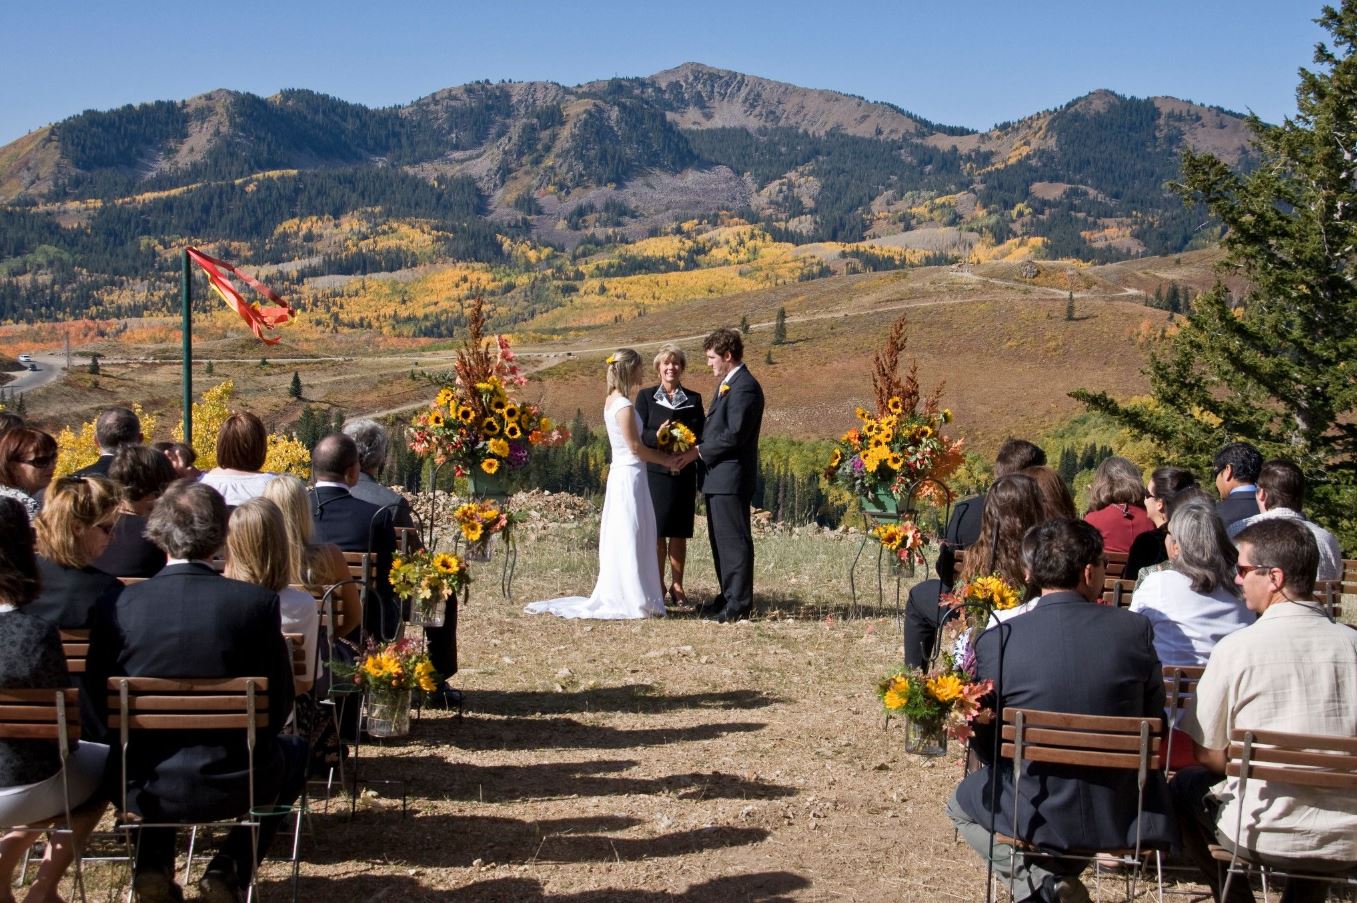 Two people getting married in the mountains of Park City, Utah.